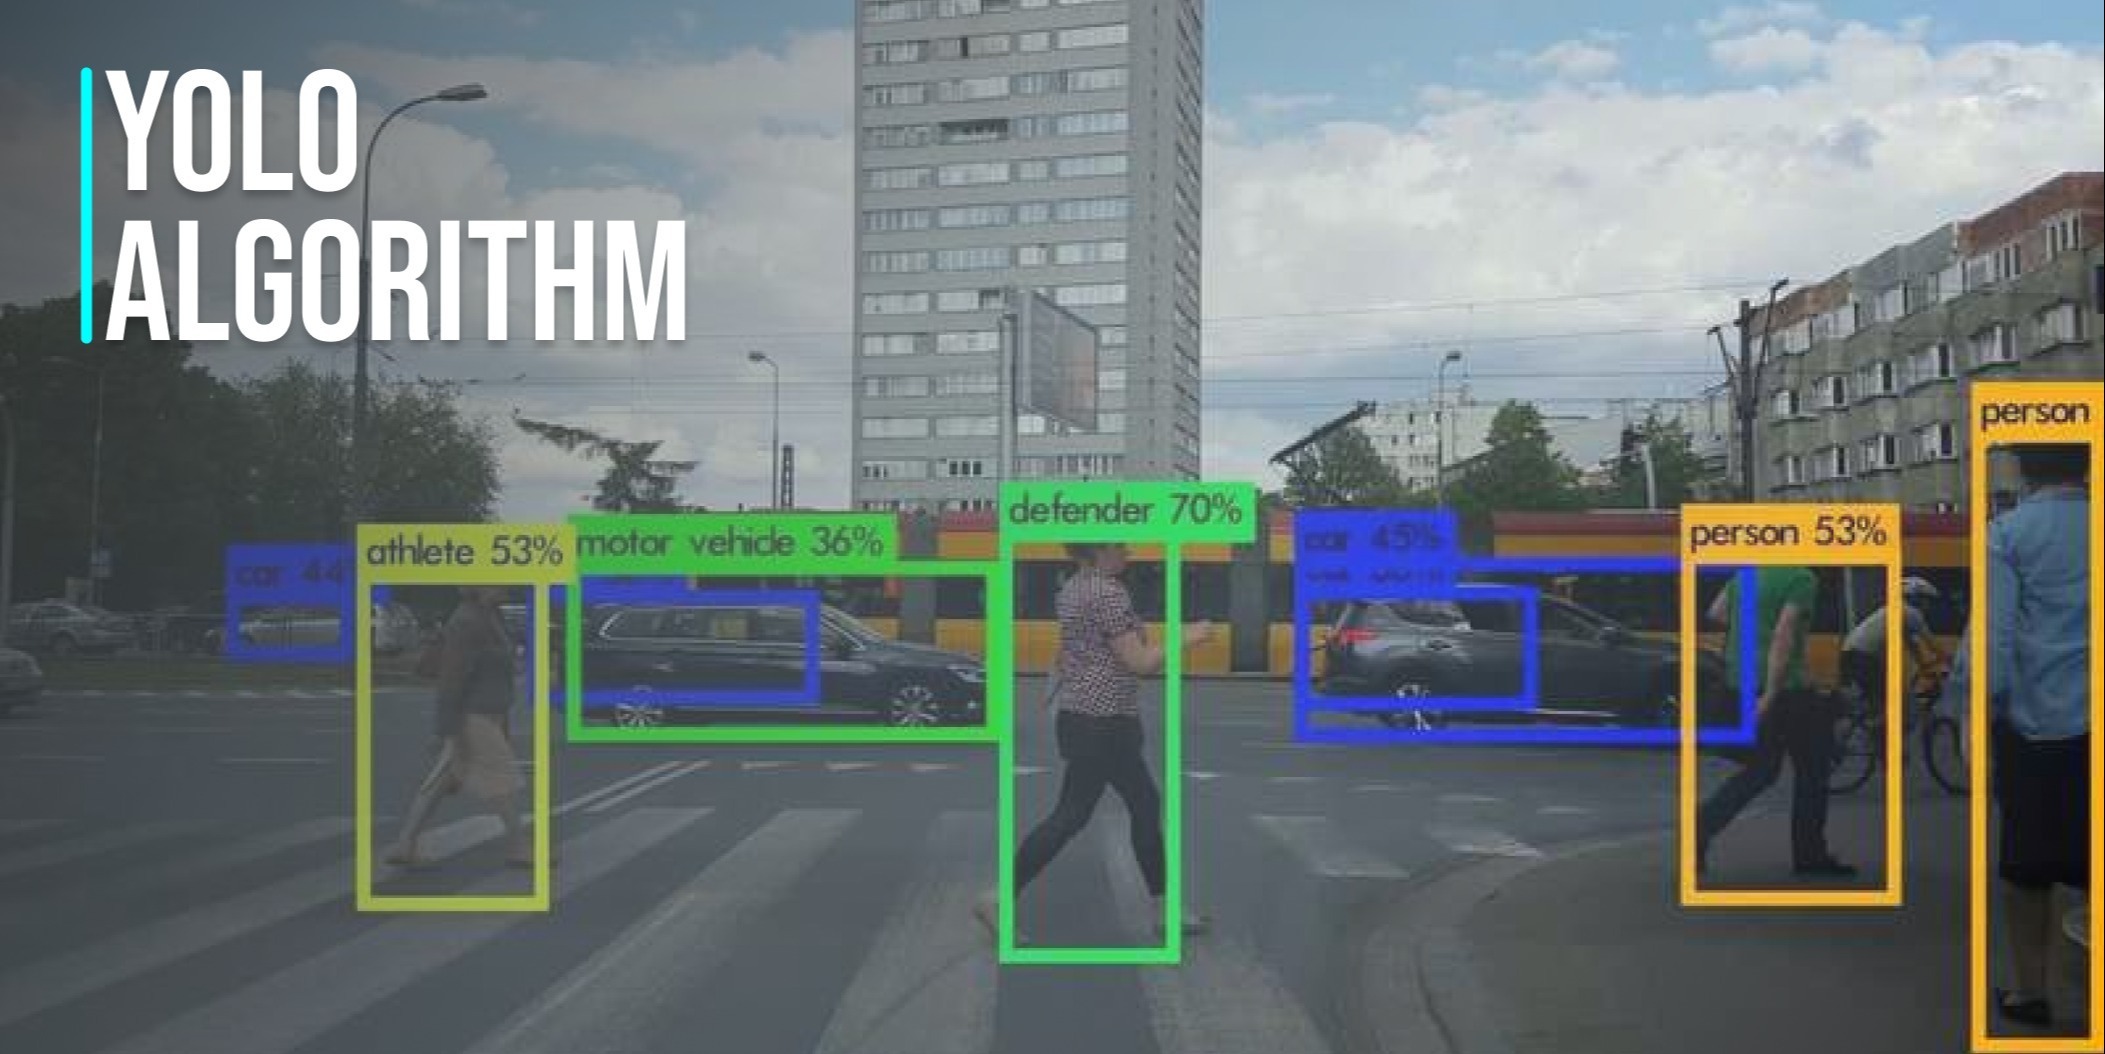 YOLO Algorithm for Object Detection